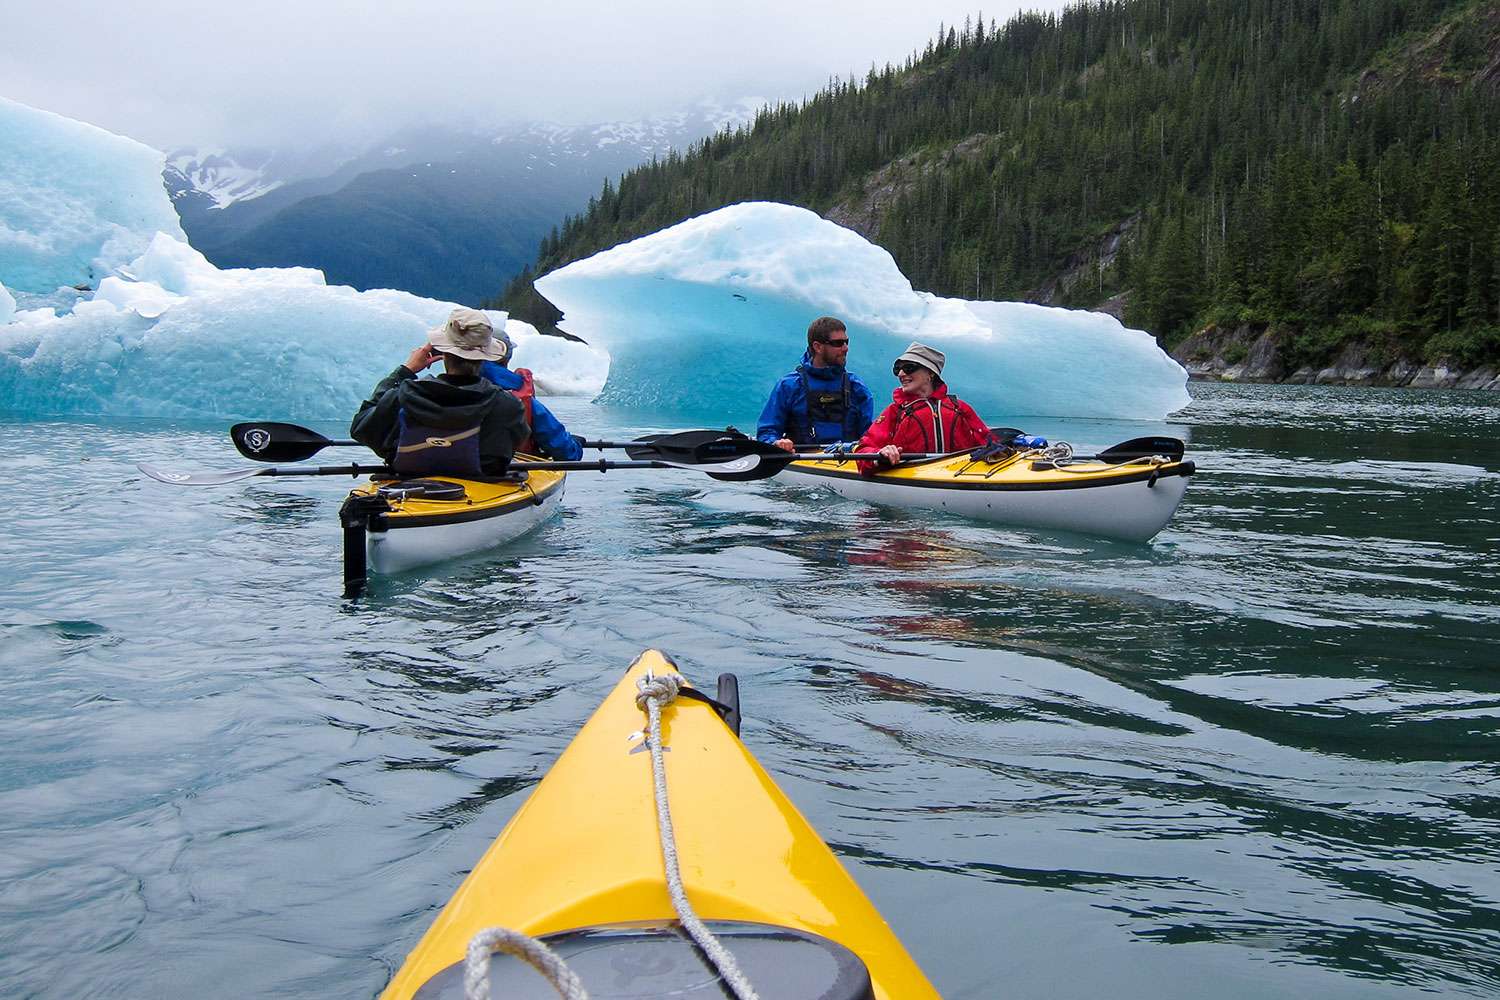 Snow Goose Yacht Charter - 2 Person Eddyline kayaks are ideal to explore the melting snowcaps